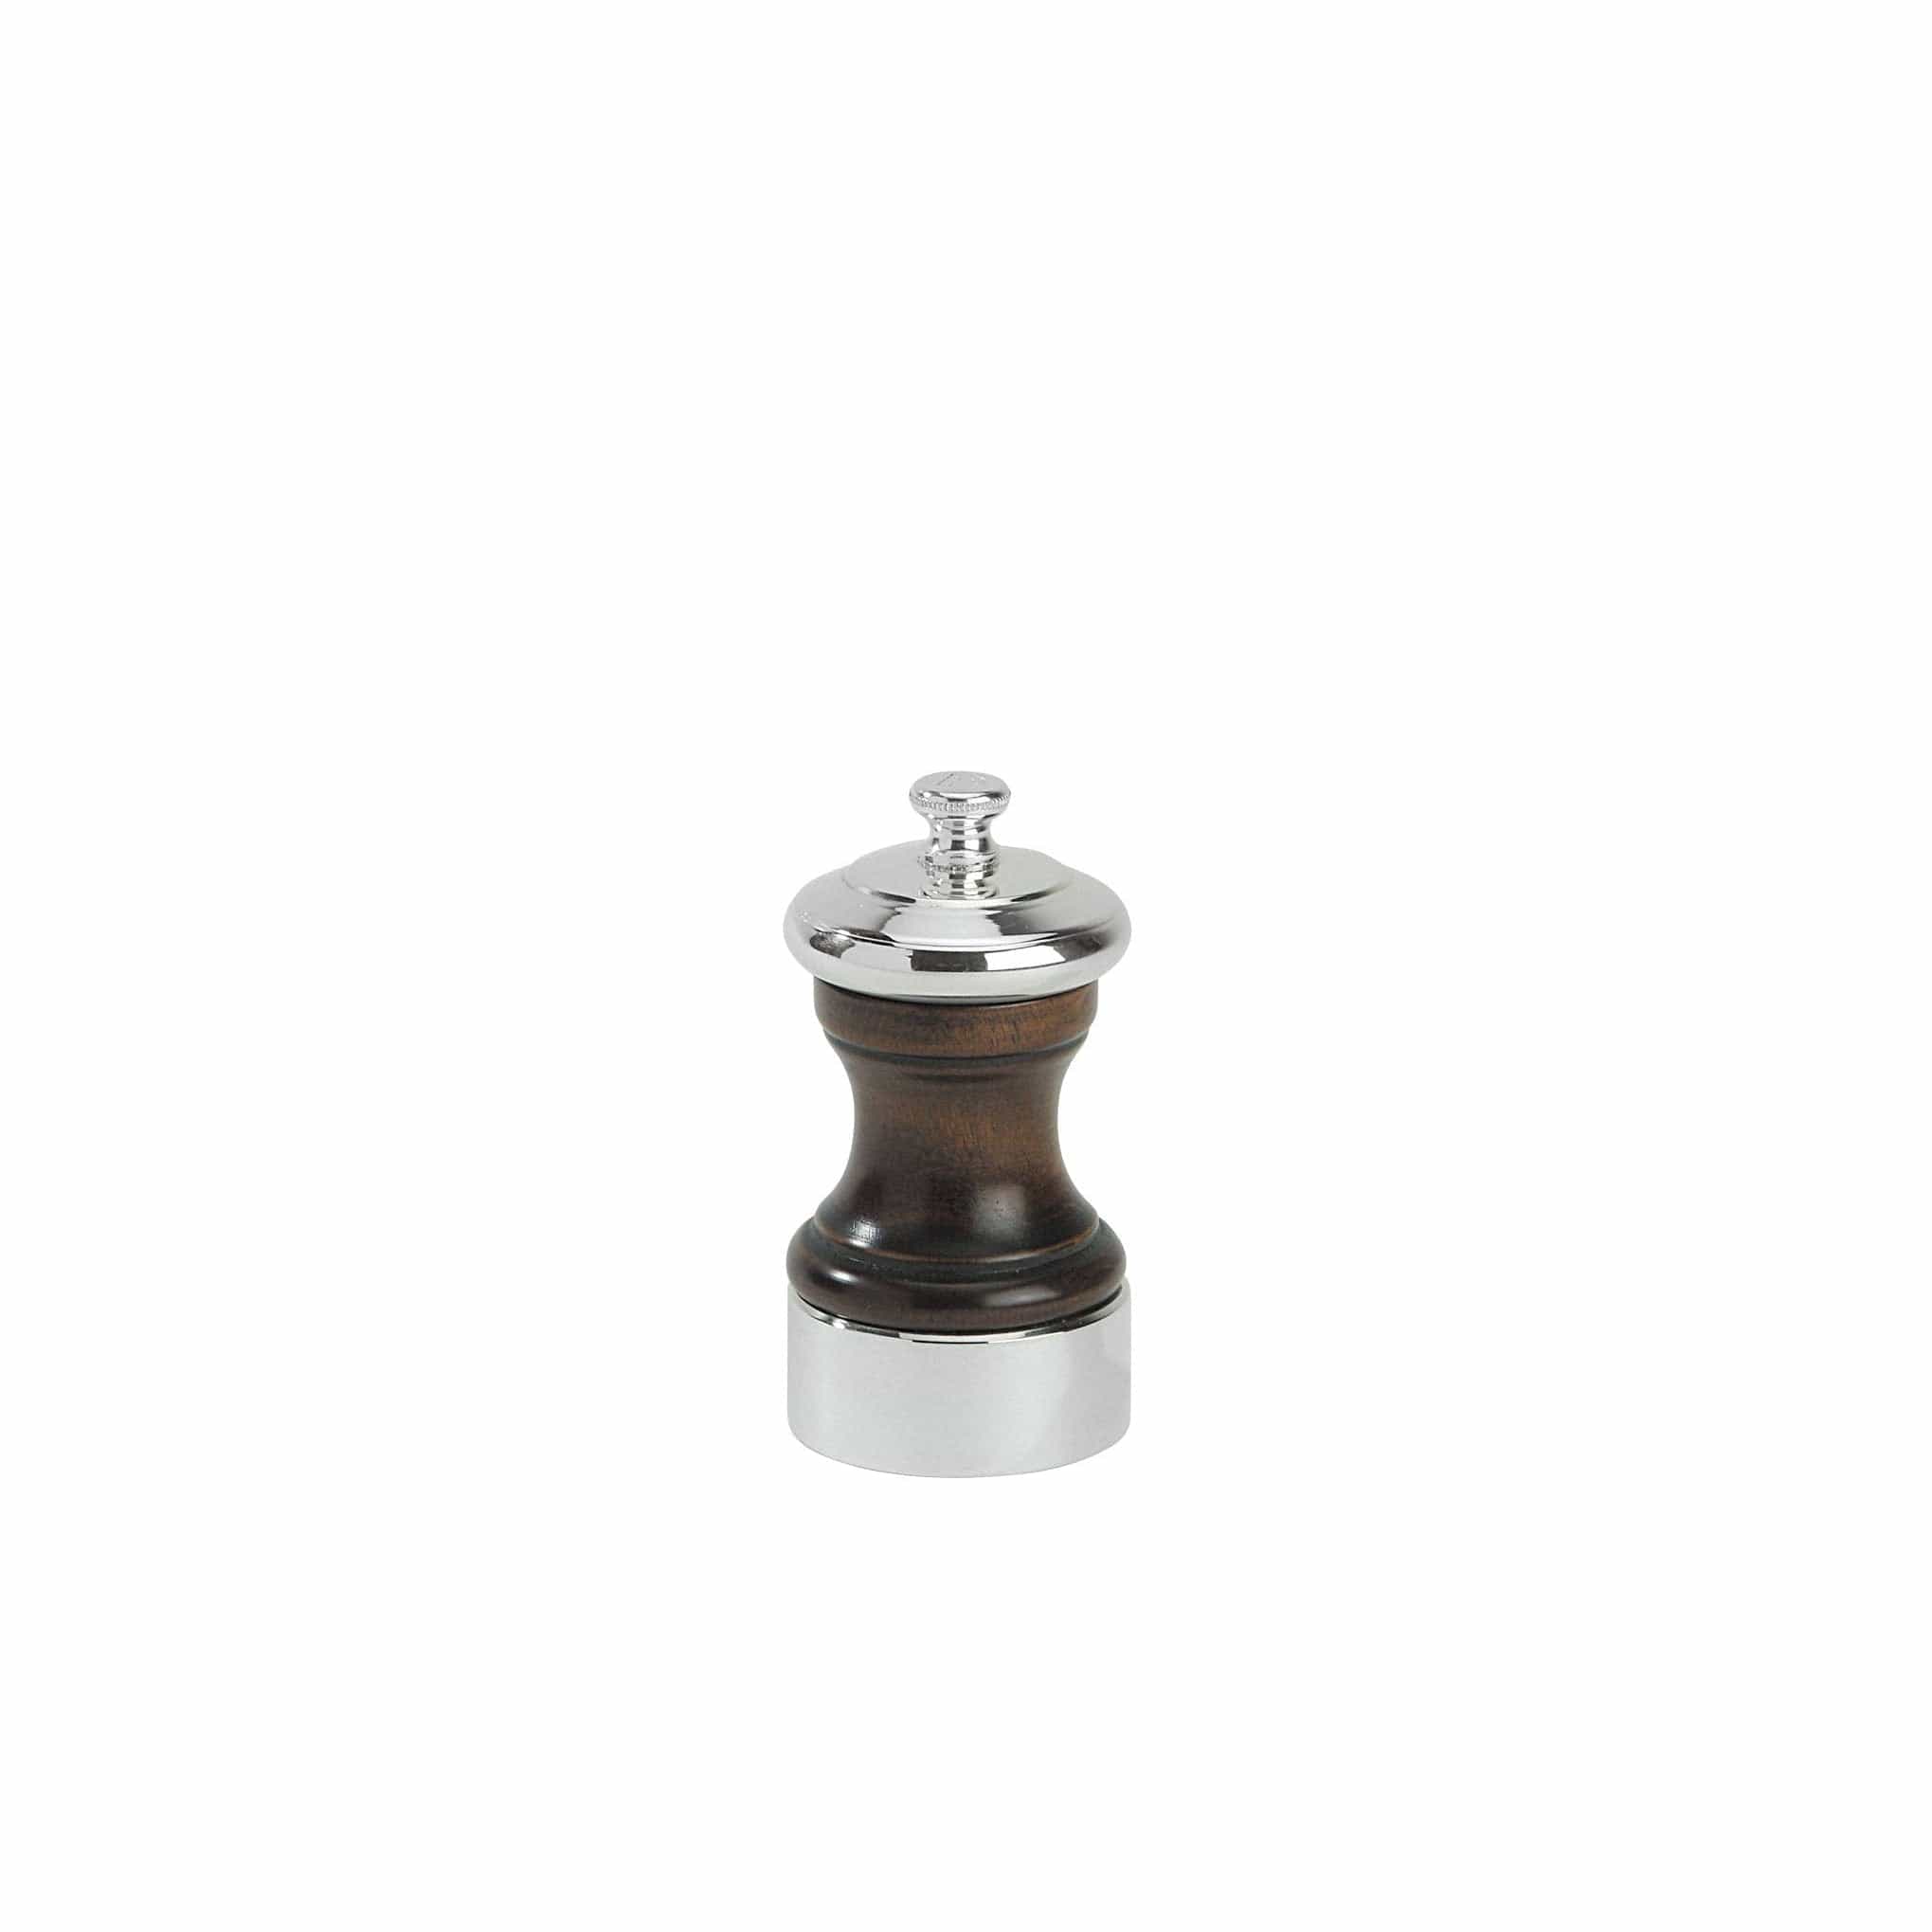 Peugeot Palace Pepper Mill Chocolate/Silver, 10 cm